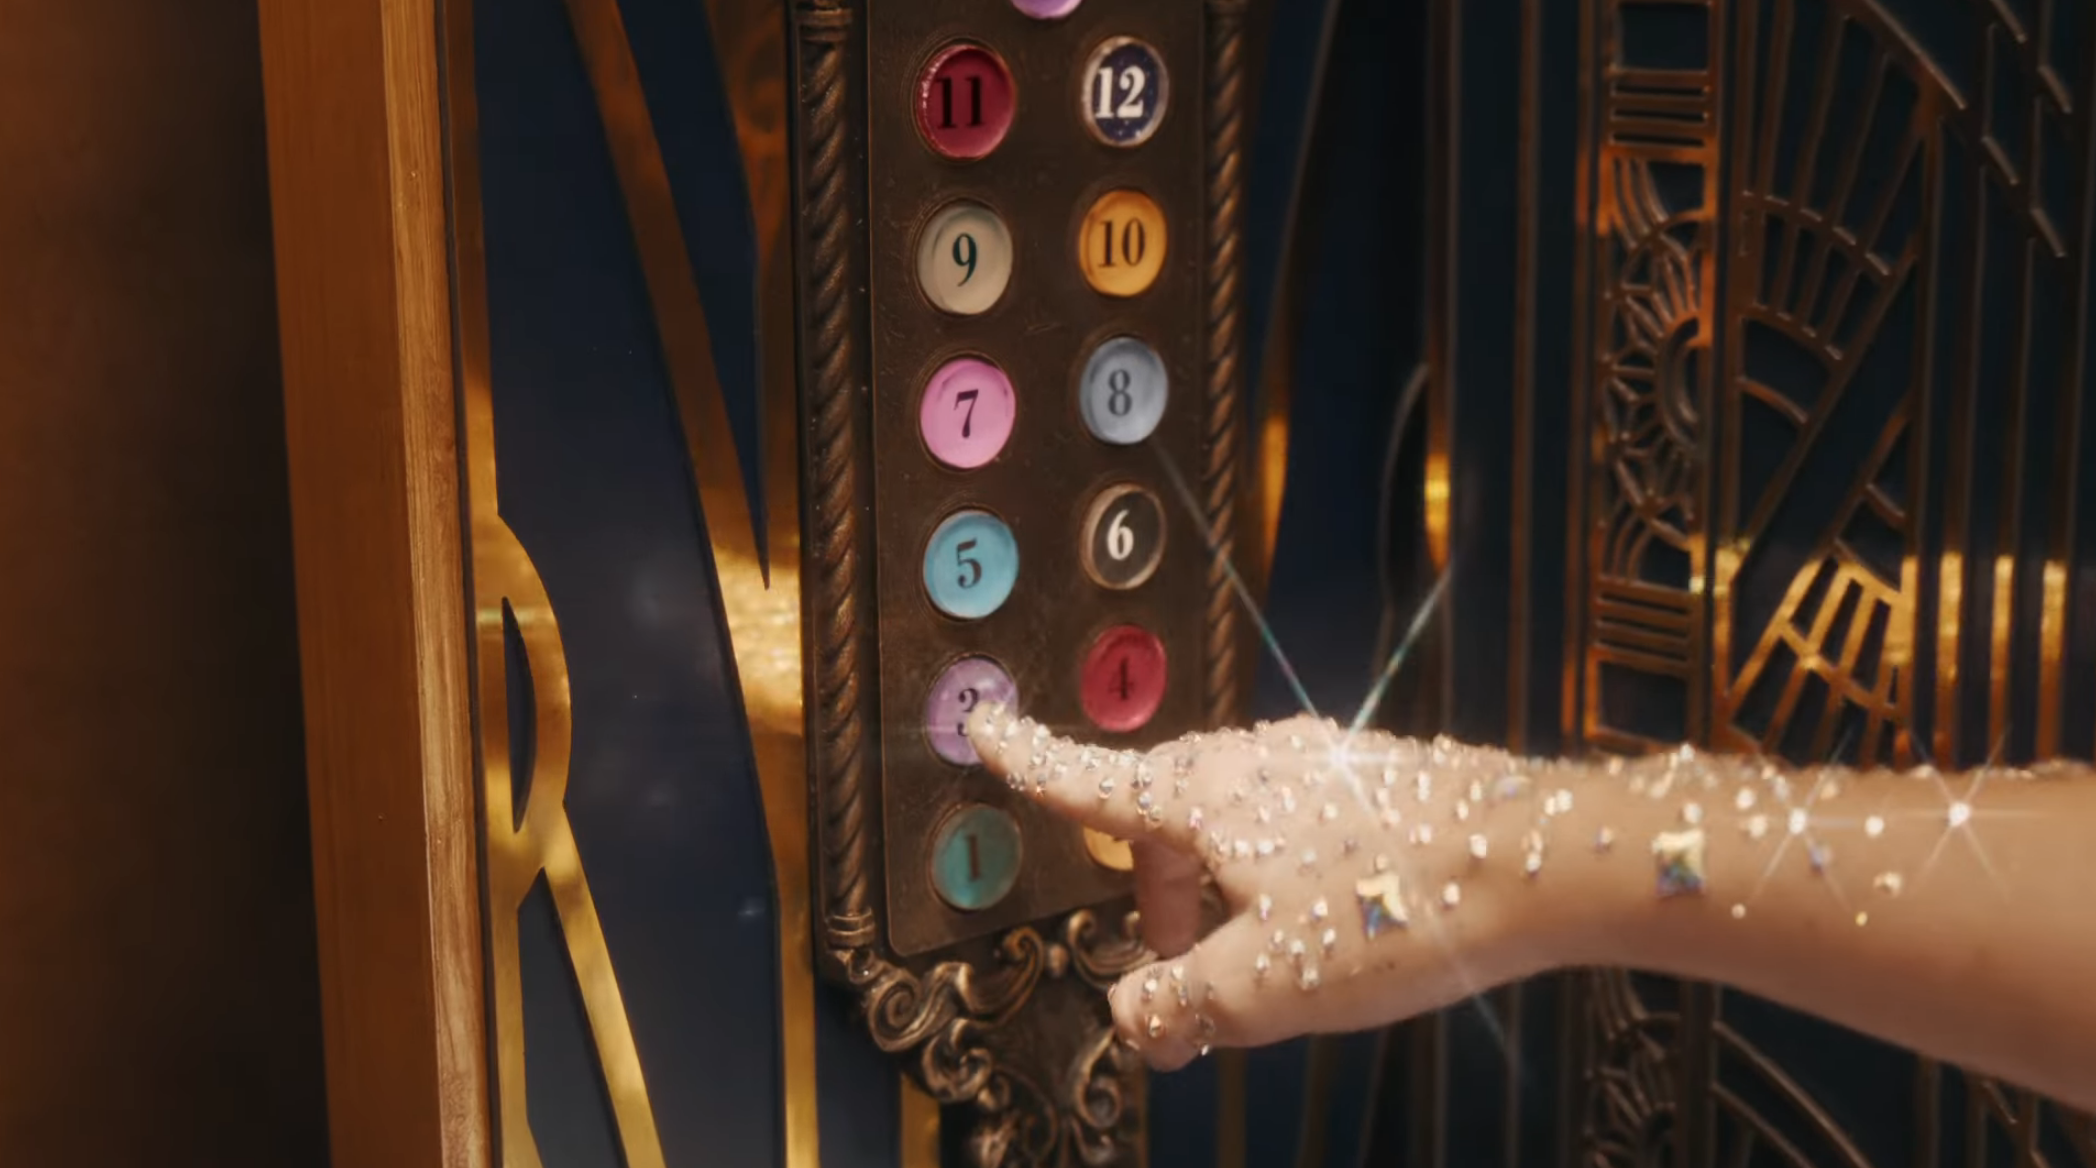 Taylor Swift's 'Bejeweled' Video Includes 'Speak Now' Easter Eggs